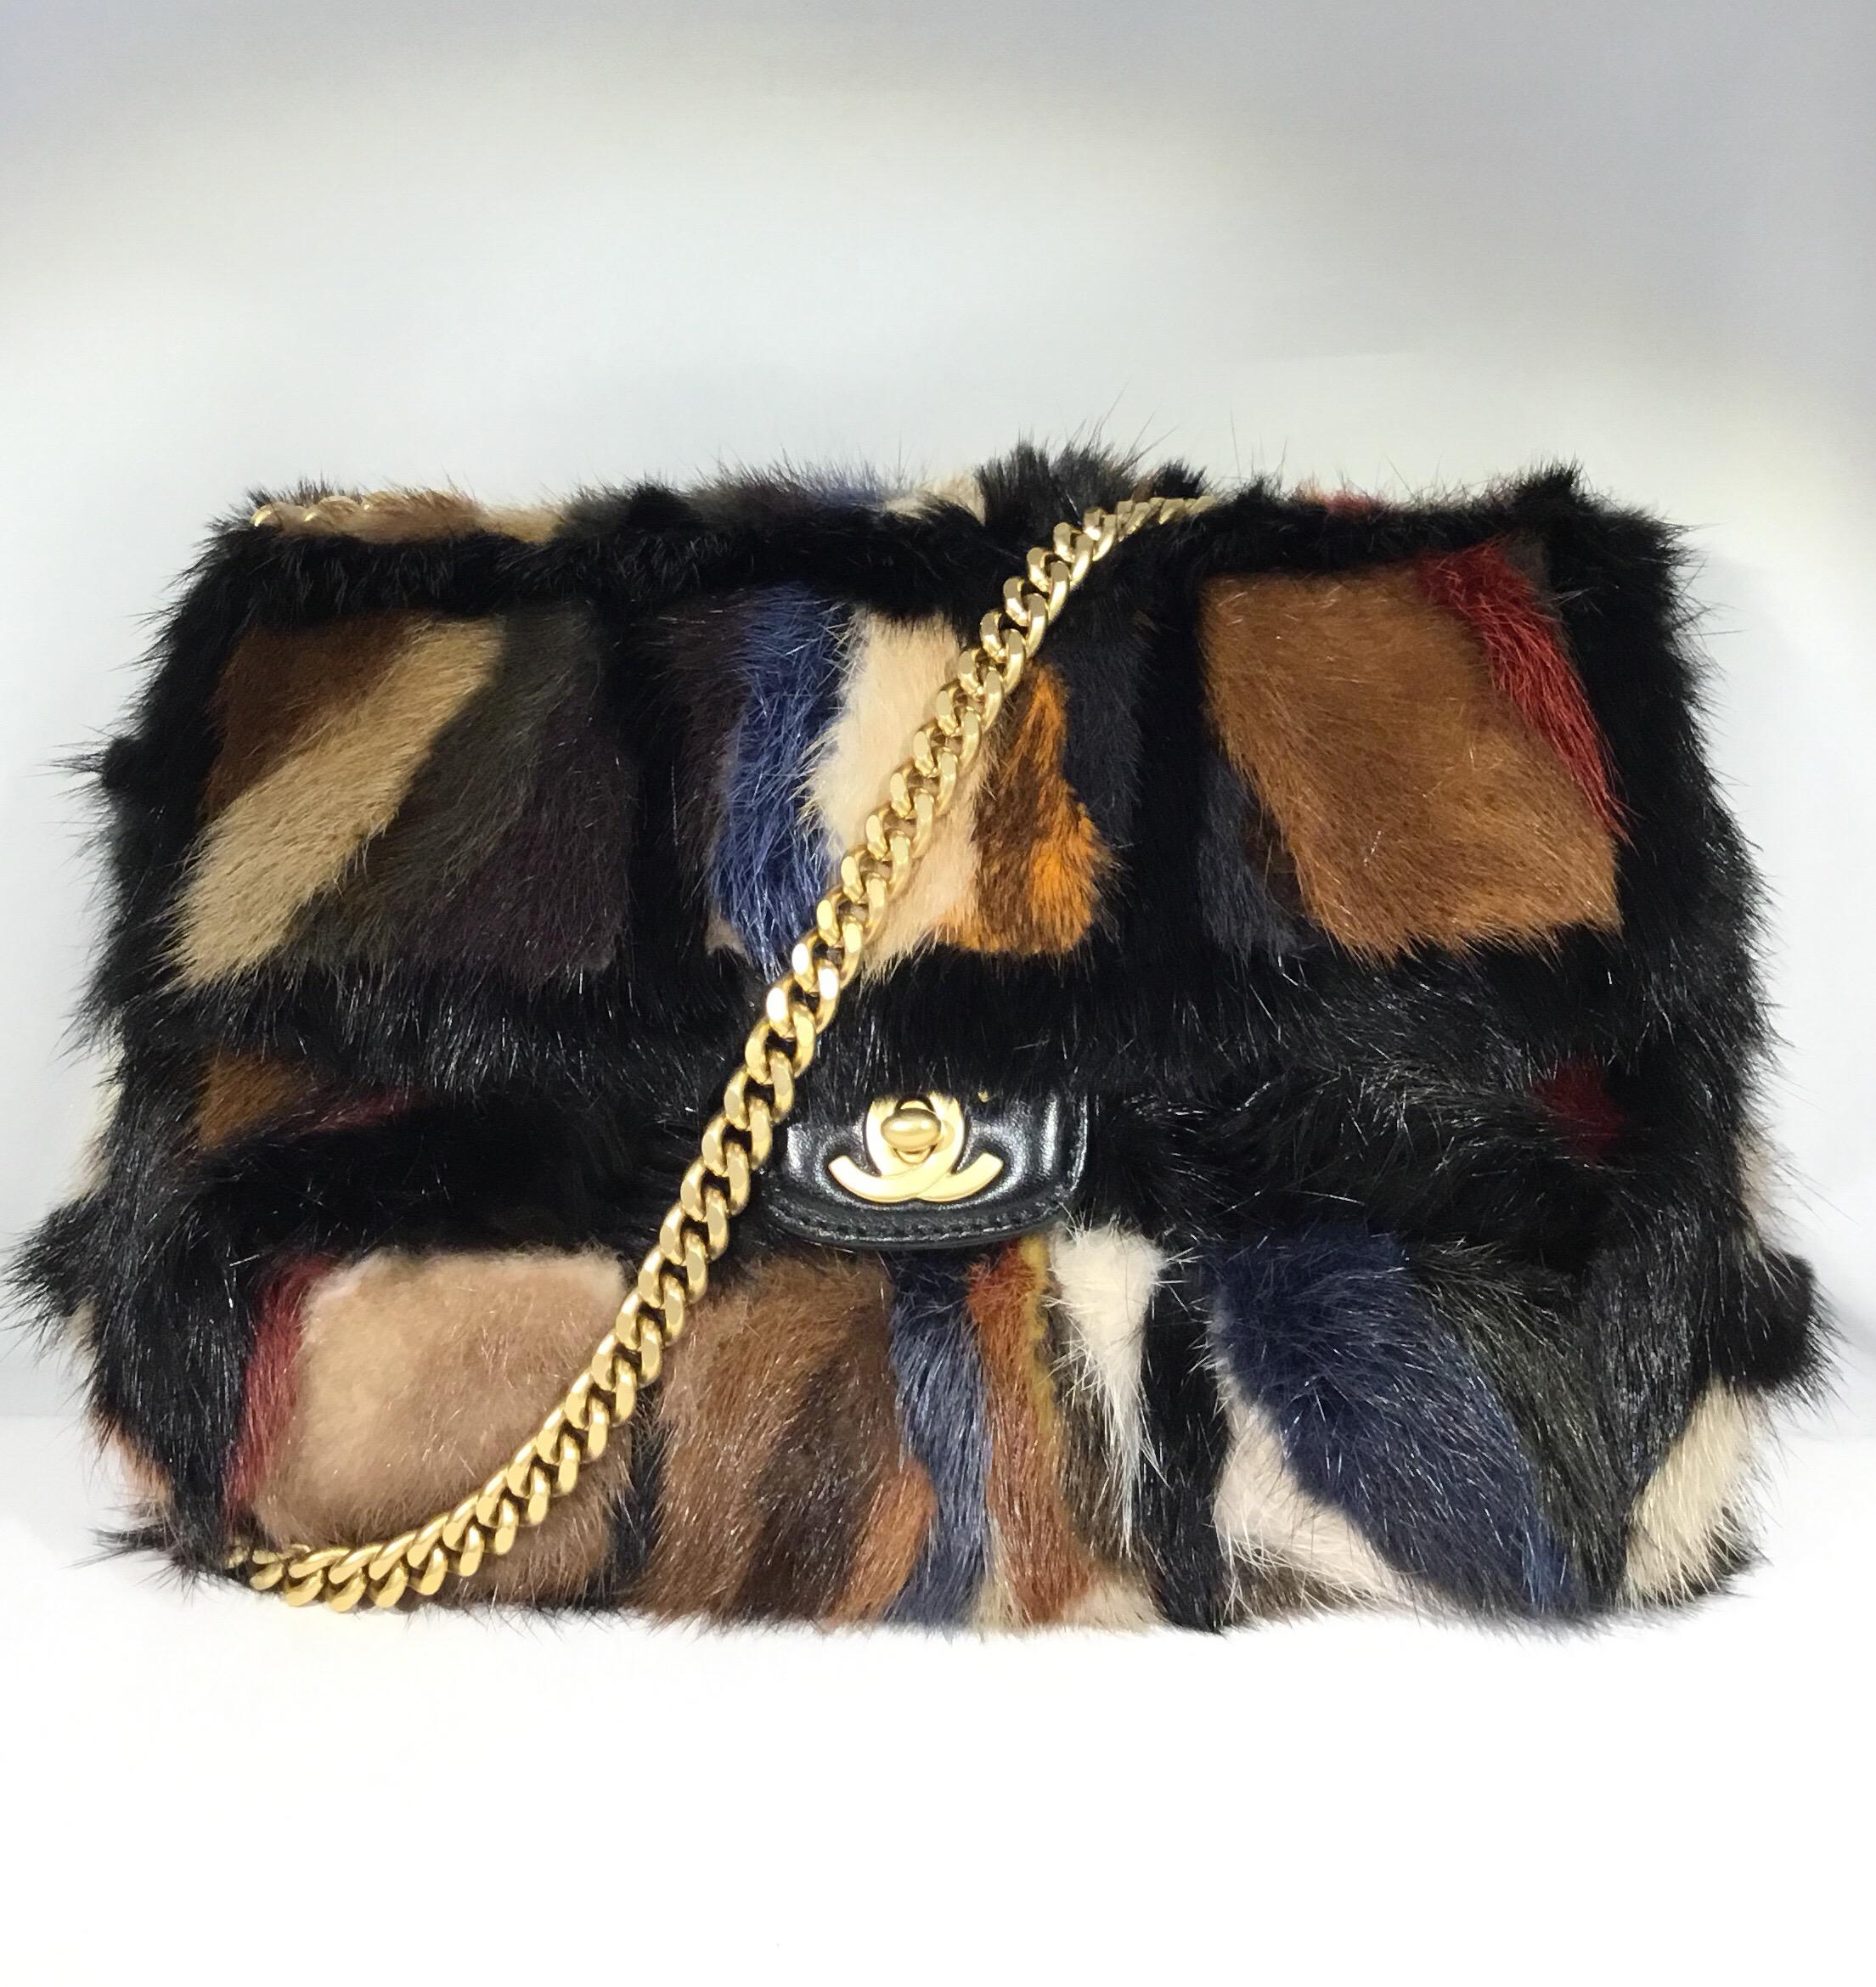 Chanel handbag features multicolored patchwork mink fur throughout with a gold-tone chain handle that is removable. Bag is fully lined in leather and has one zipper pocket. Made in Italy. Includes original dustbag.

Dimensions:
9” x 3” x 7”, Strap